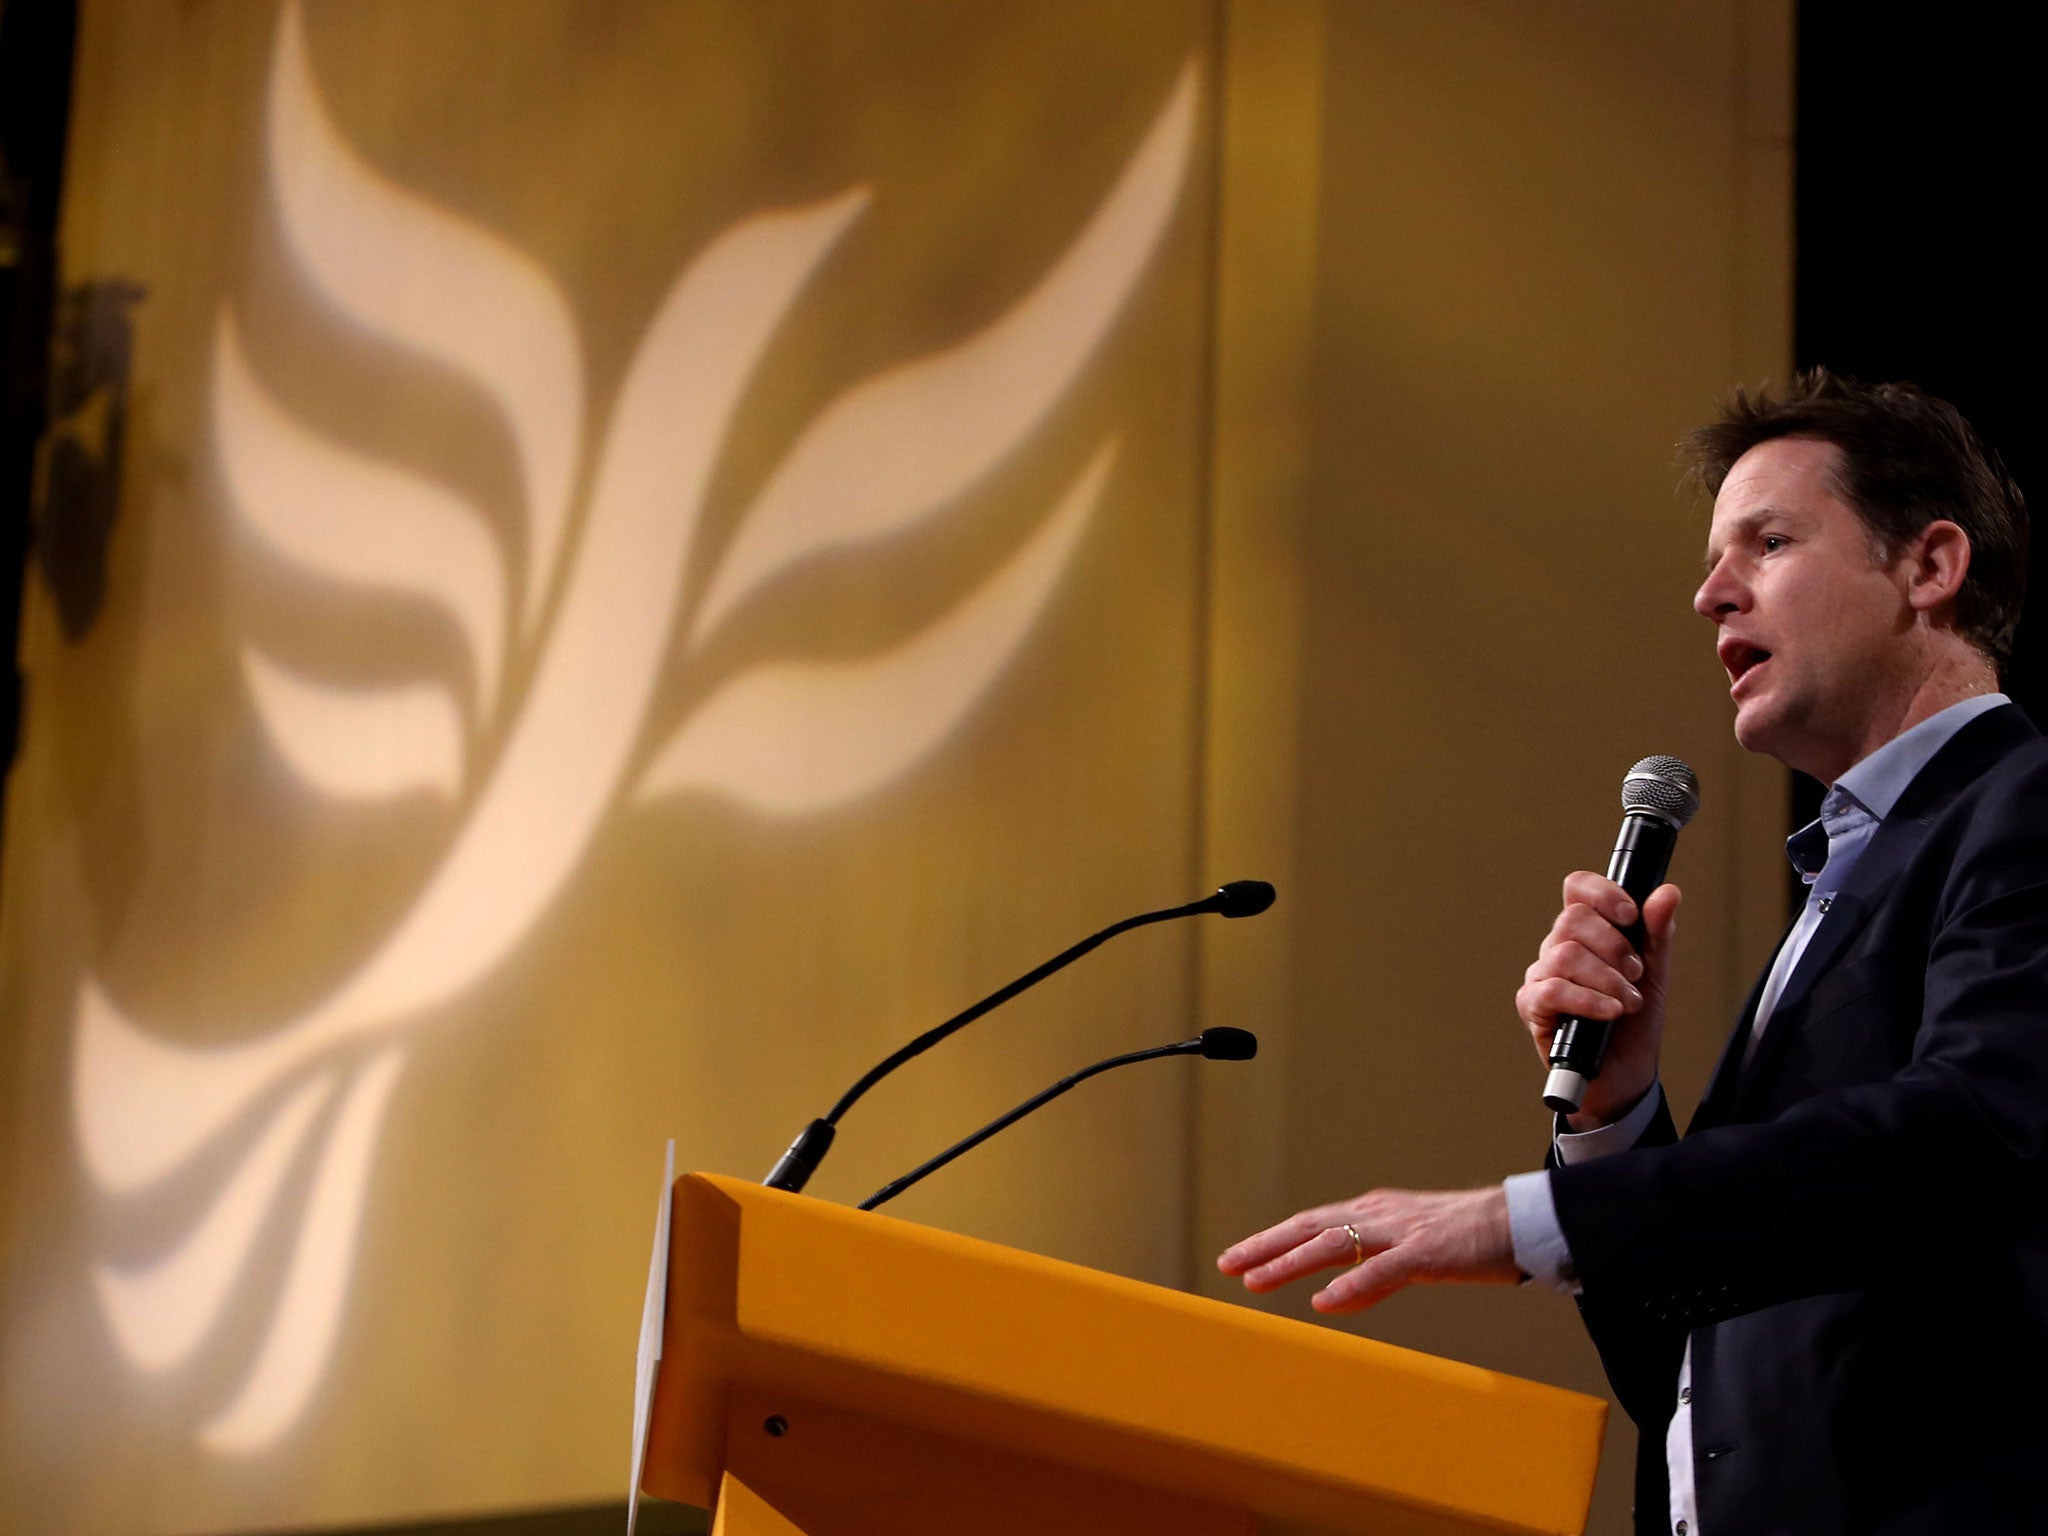 In his keynote speech to the party's spring conference in Liverpool, Mr Clegg said: "So let me be clear: just like we would not put UKIP in charge of Europe, we are not going to put the SNP in charge of Britain - country they want to rip apart. It's just not going to happen."